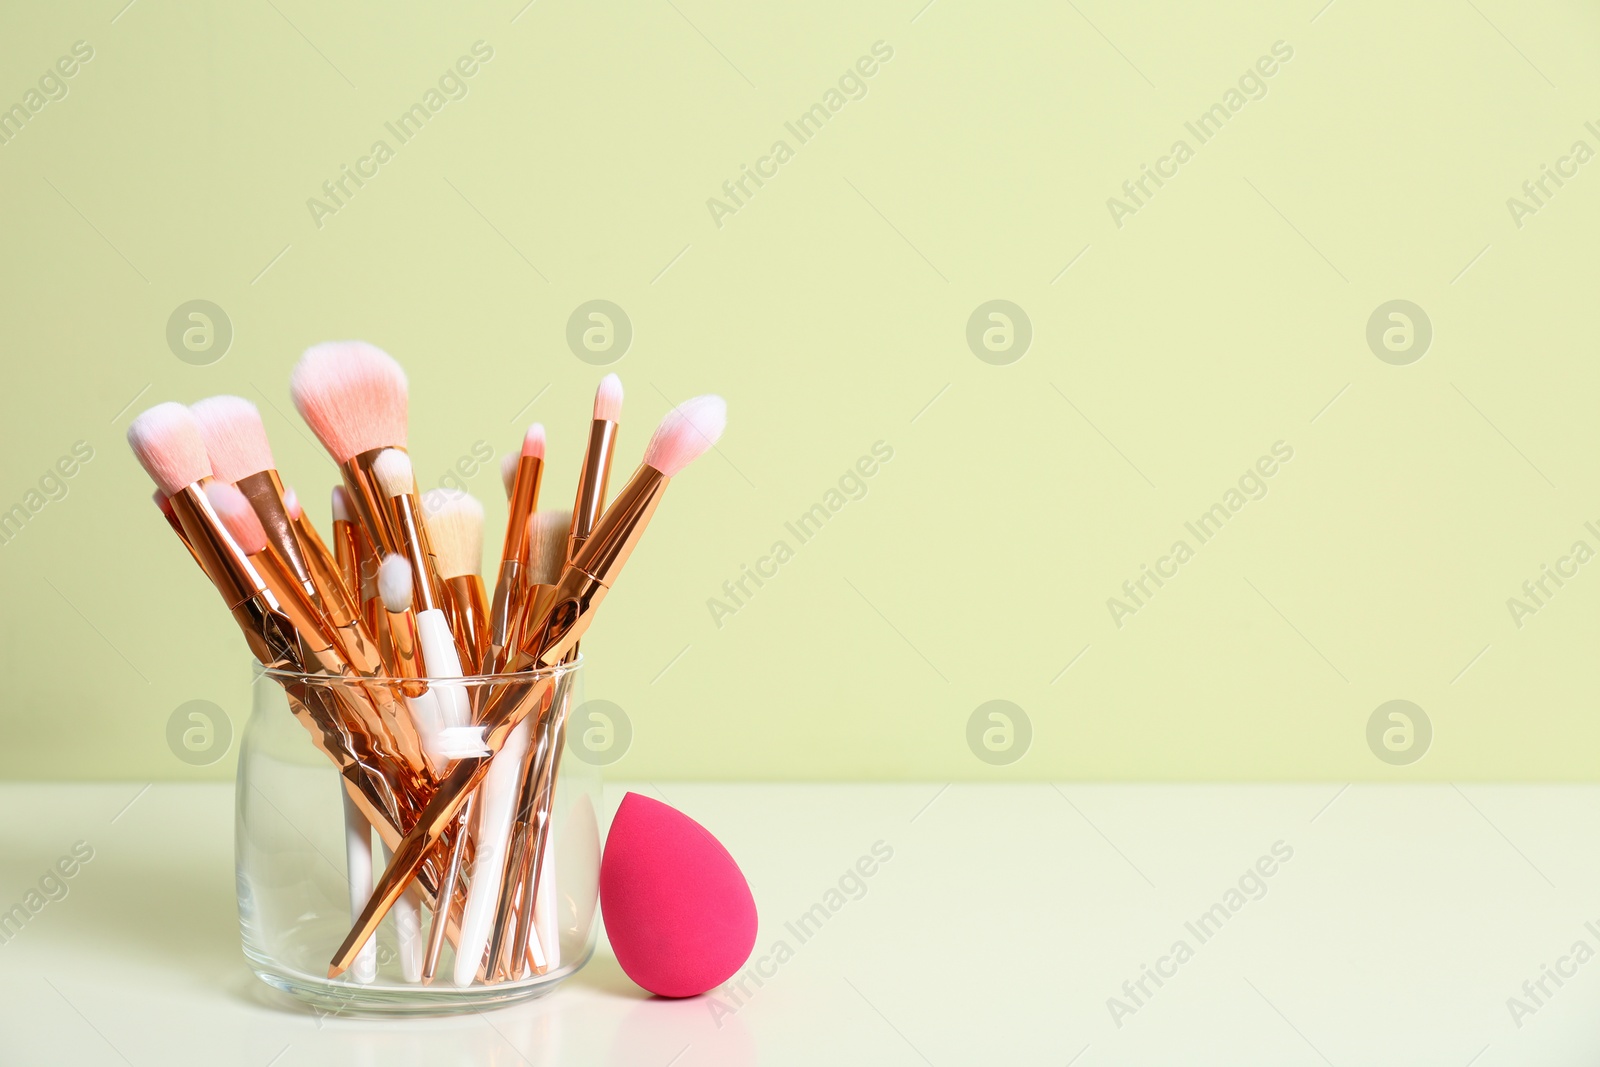 Photo of Jar with makeup brushes and sponge on table. Space for text